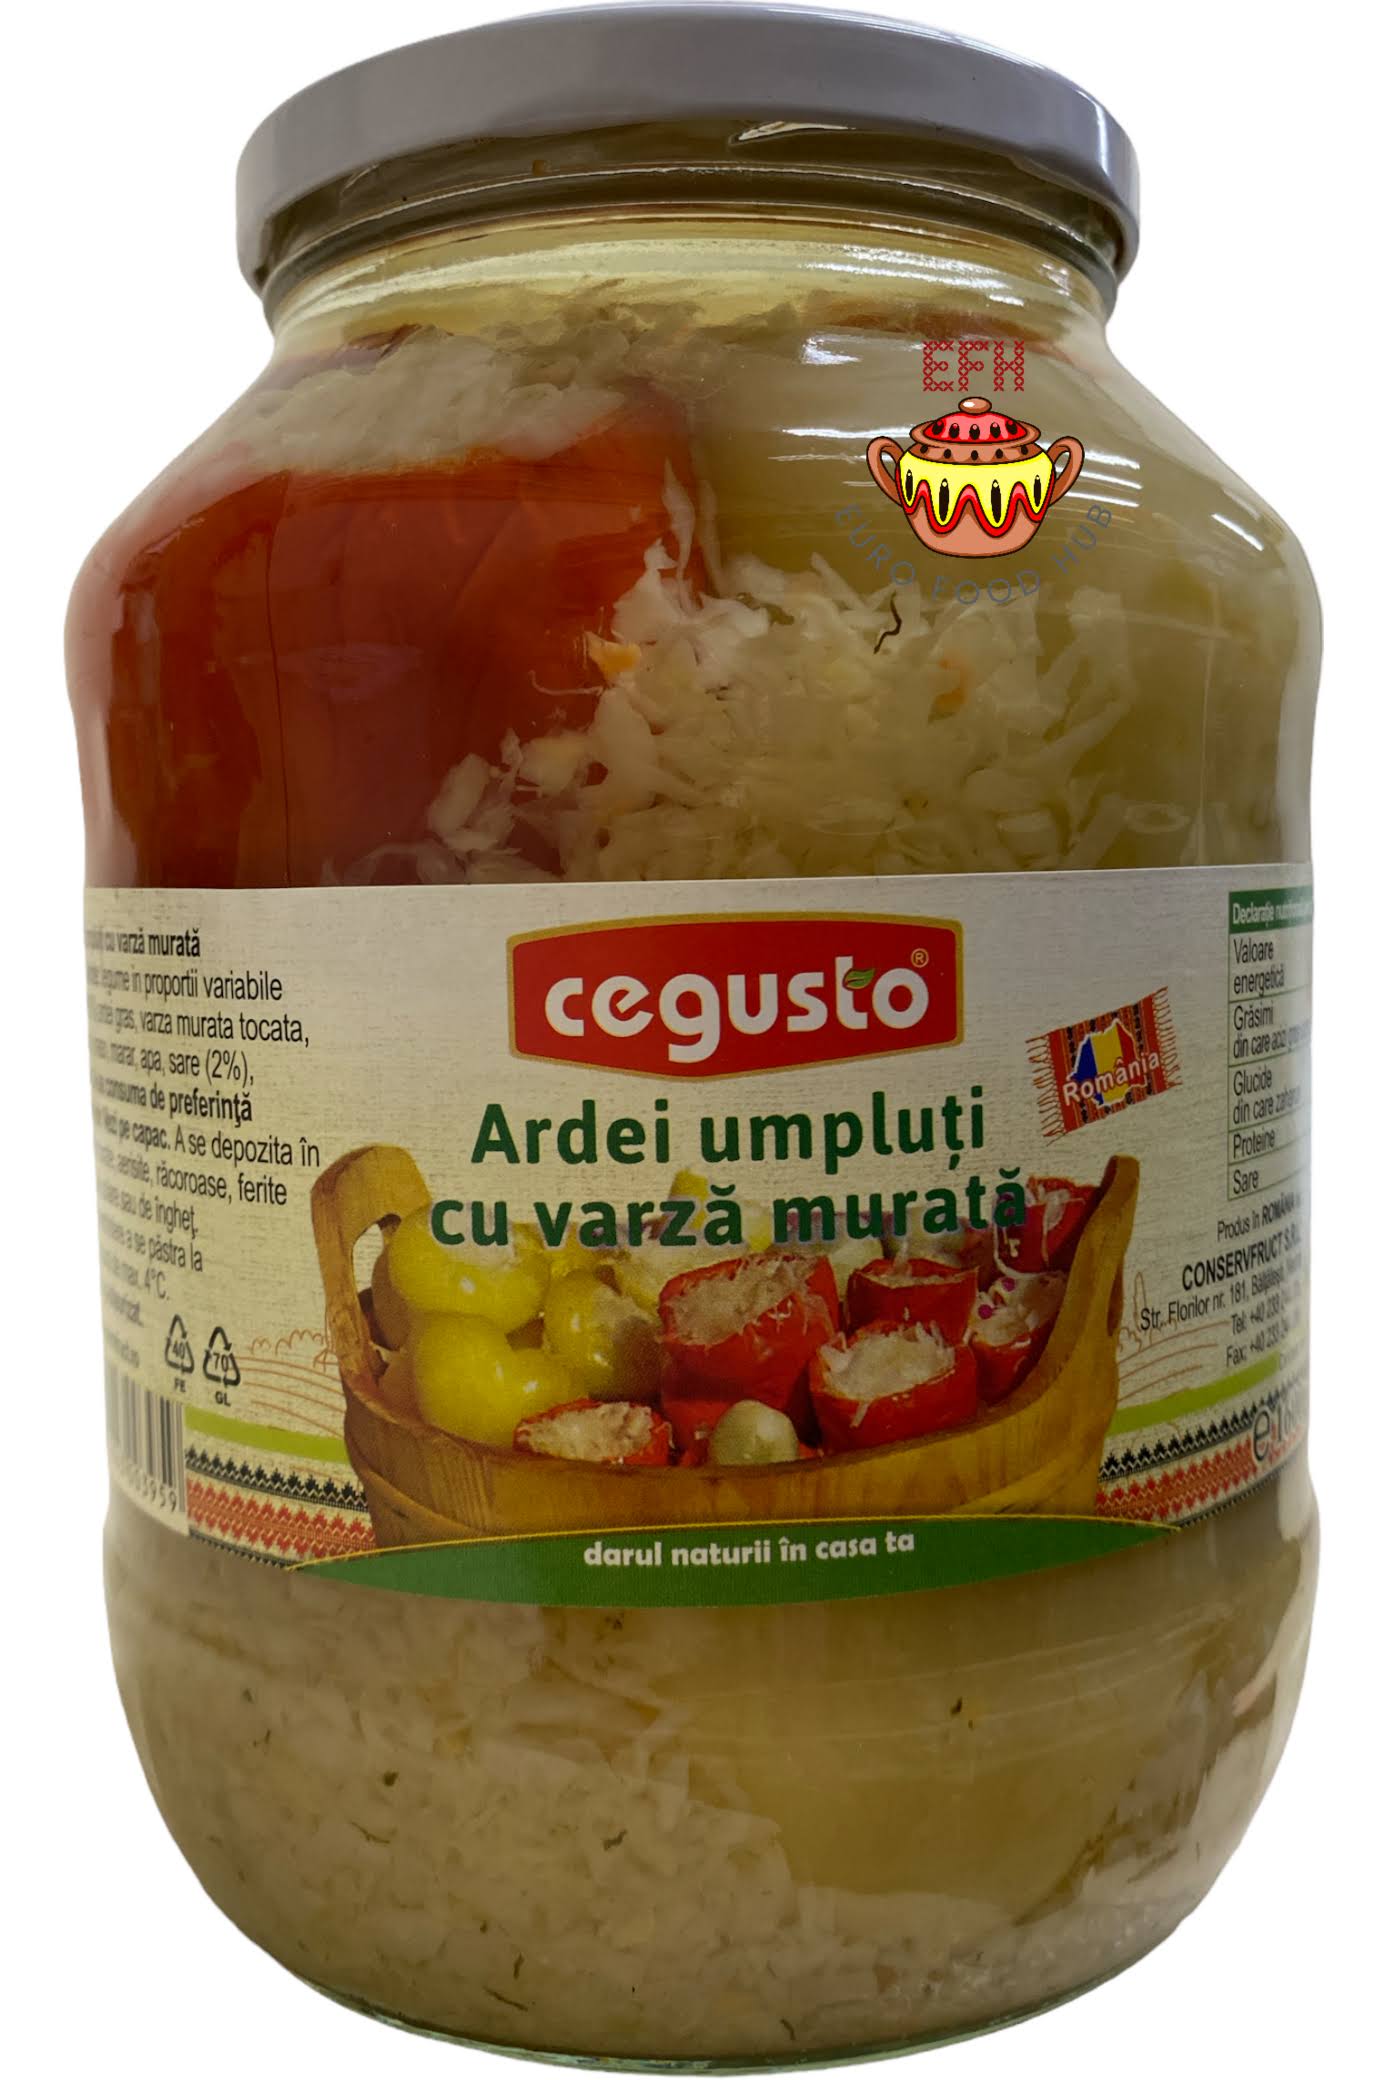 Romanian Stuffed Bell Peppers with Cabbage - Cegusto 1.6 kg